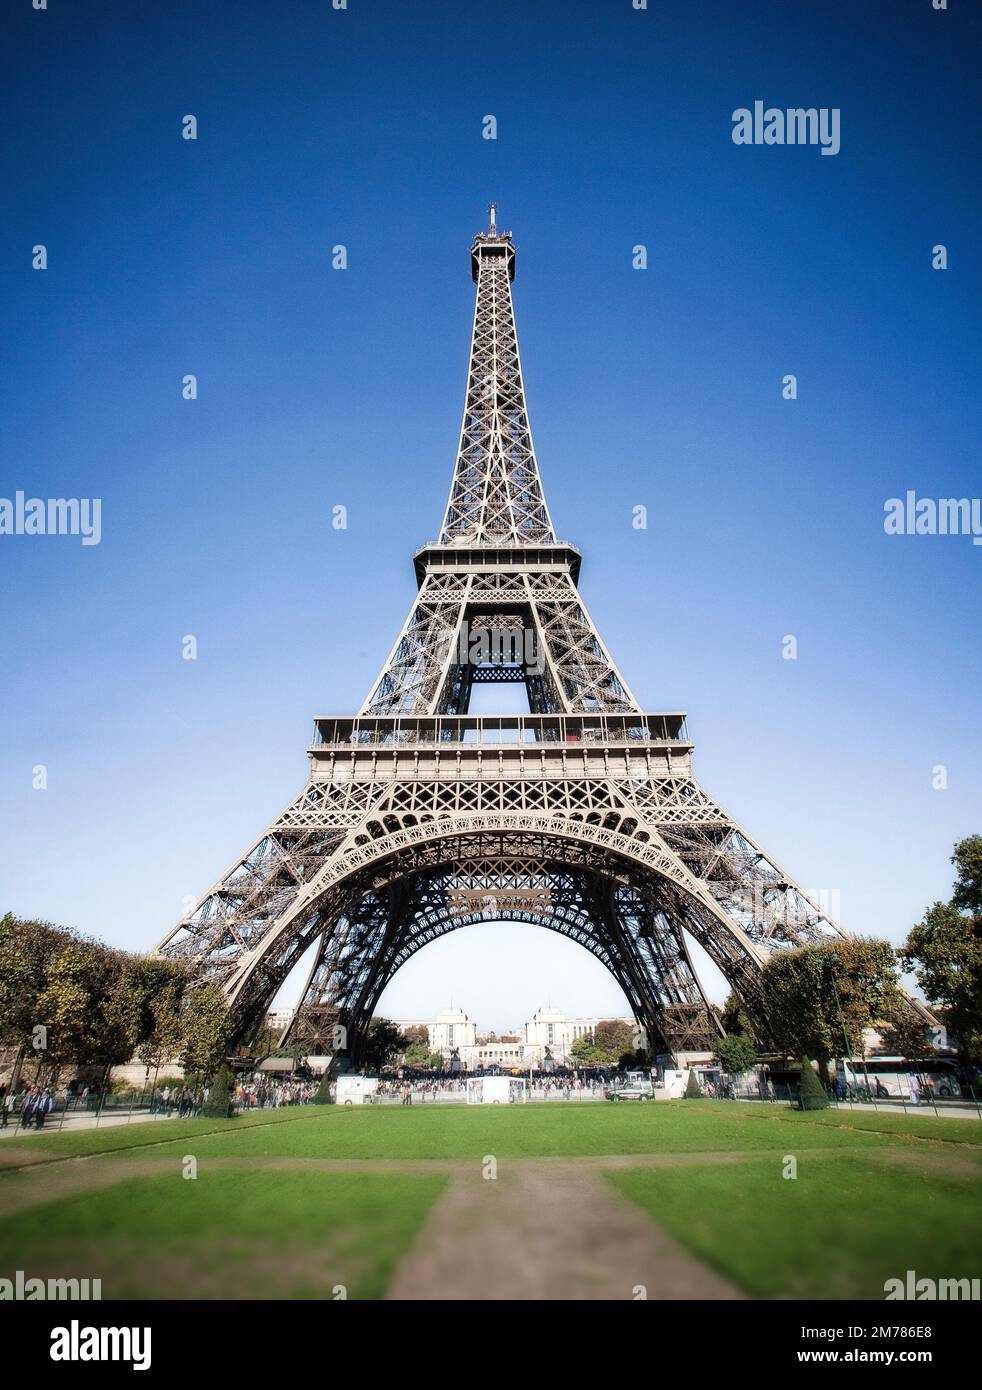 The iconic Eiffel Tower on a perfect fall day in Paris, France. Stock Photo